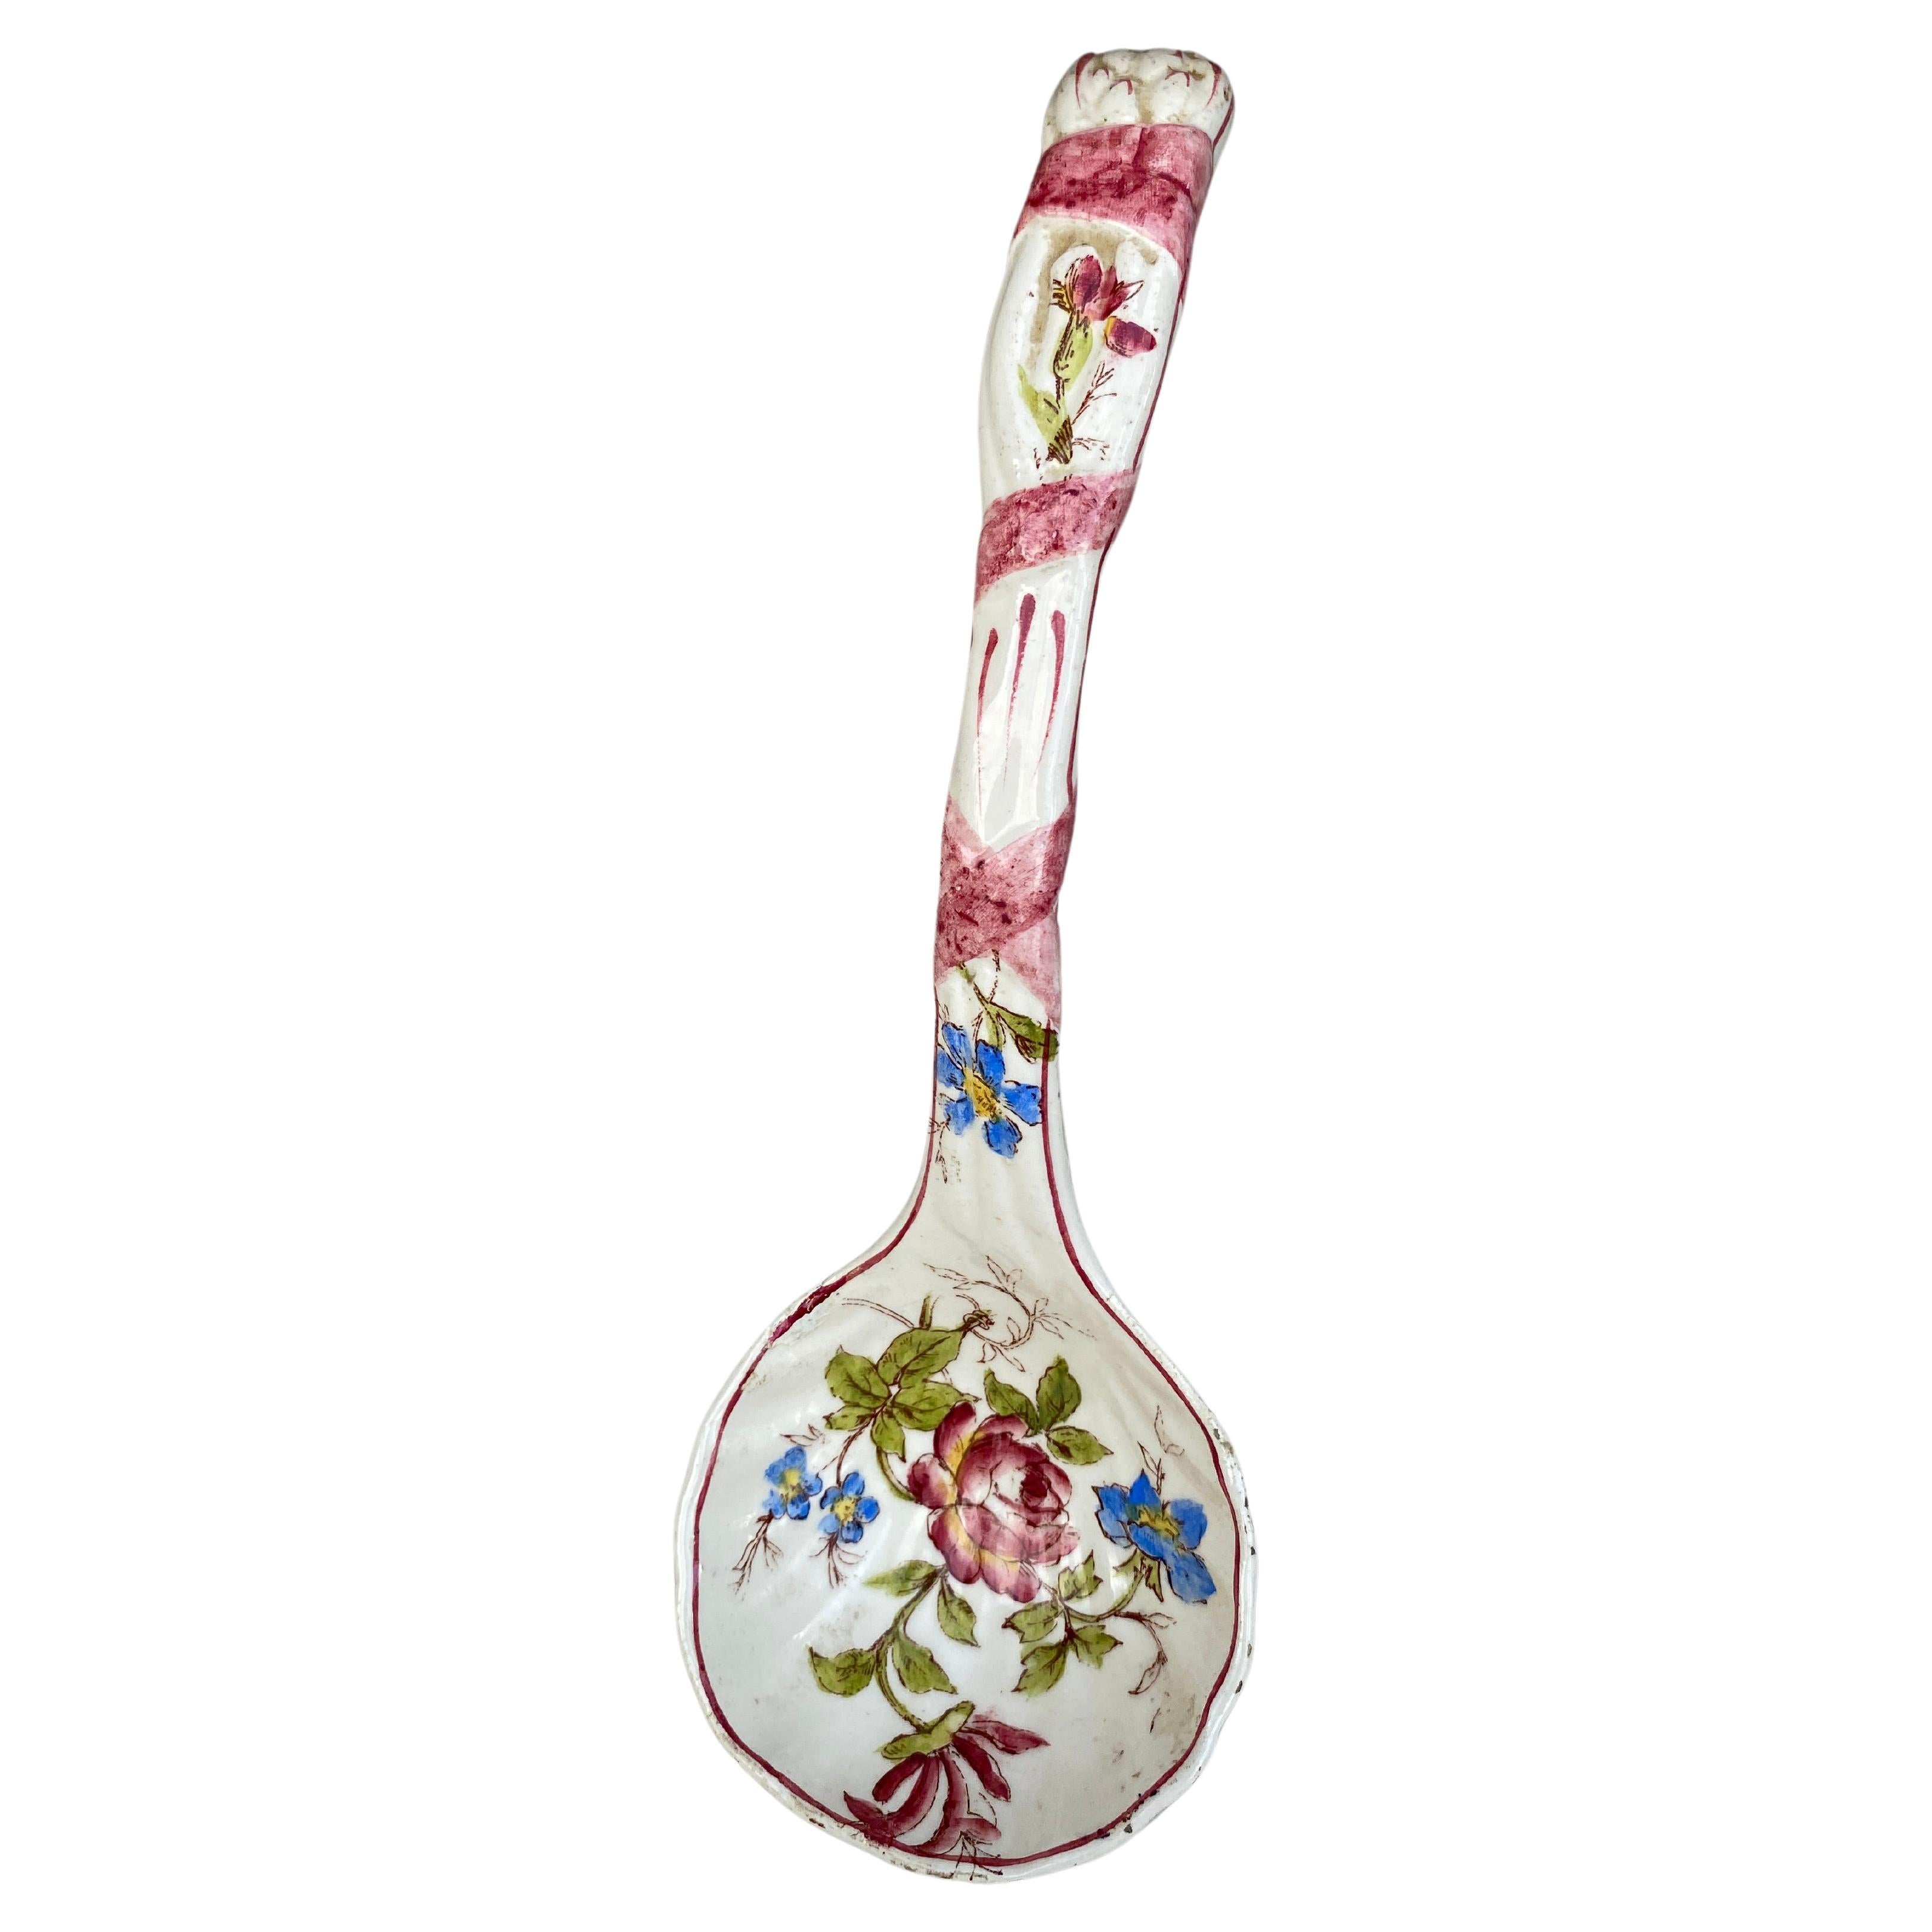 French Majolica Spoon Longchamp Circa 1890.
Decorated with flowers.